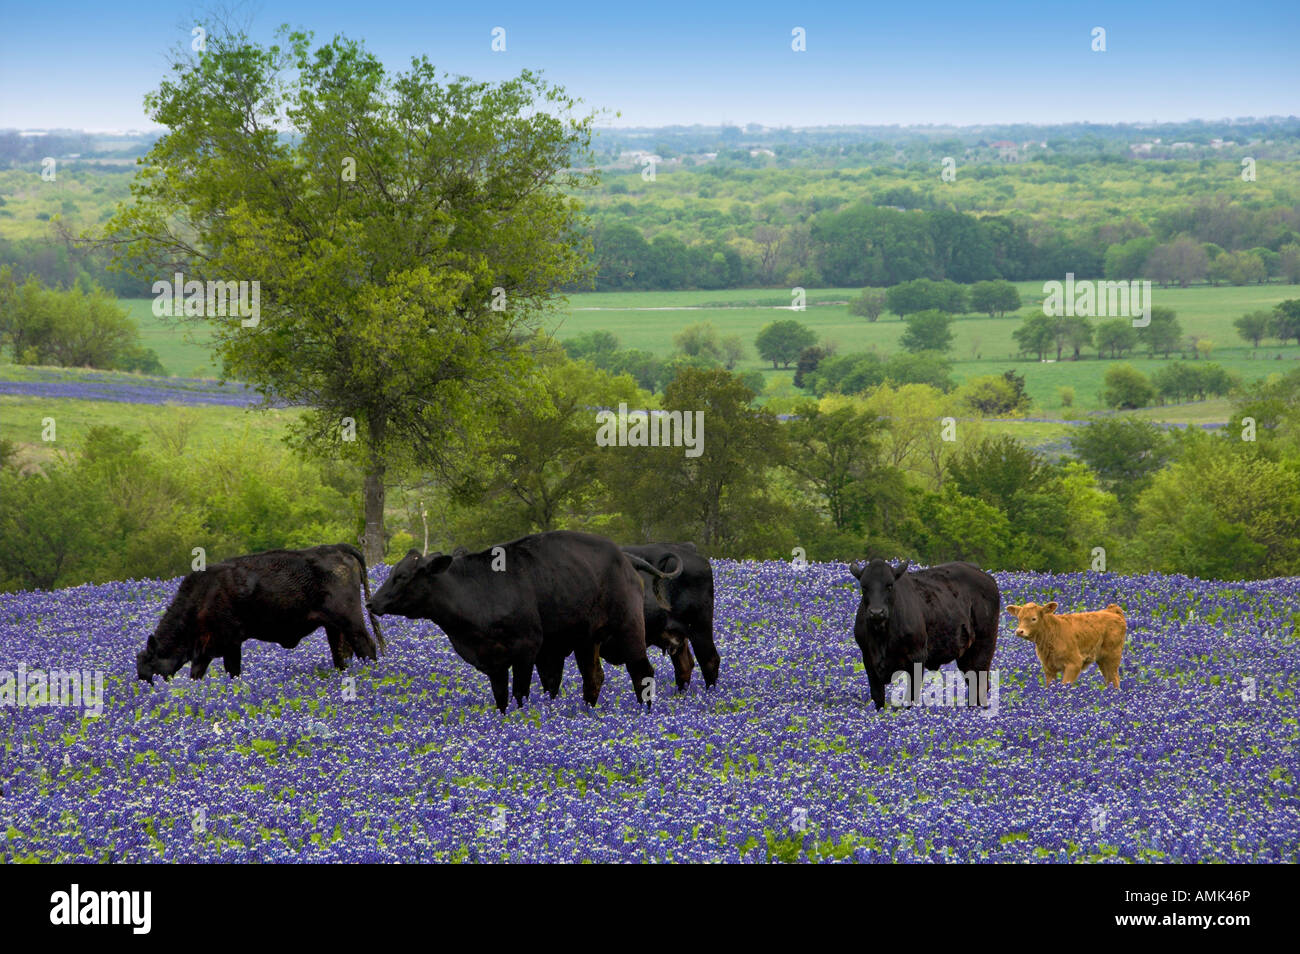 A herd of black Angus cows grazing in a field of Texas bluebonnets near Ennis Texas USA Stock Photo